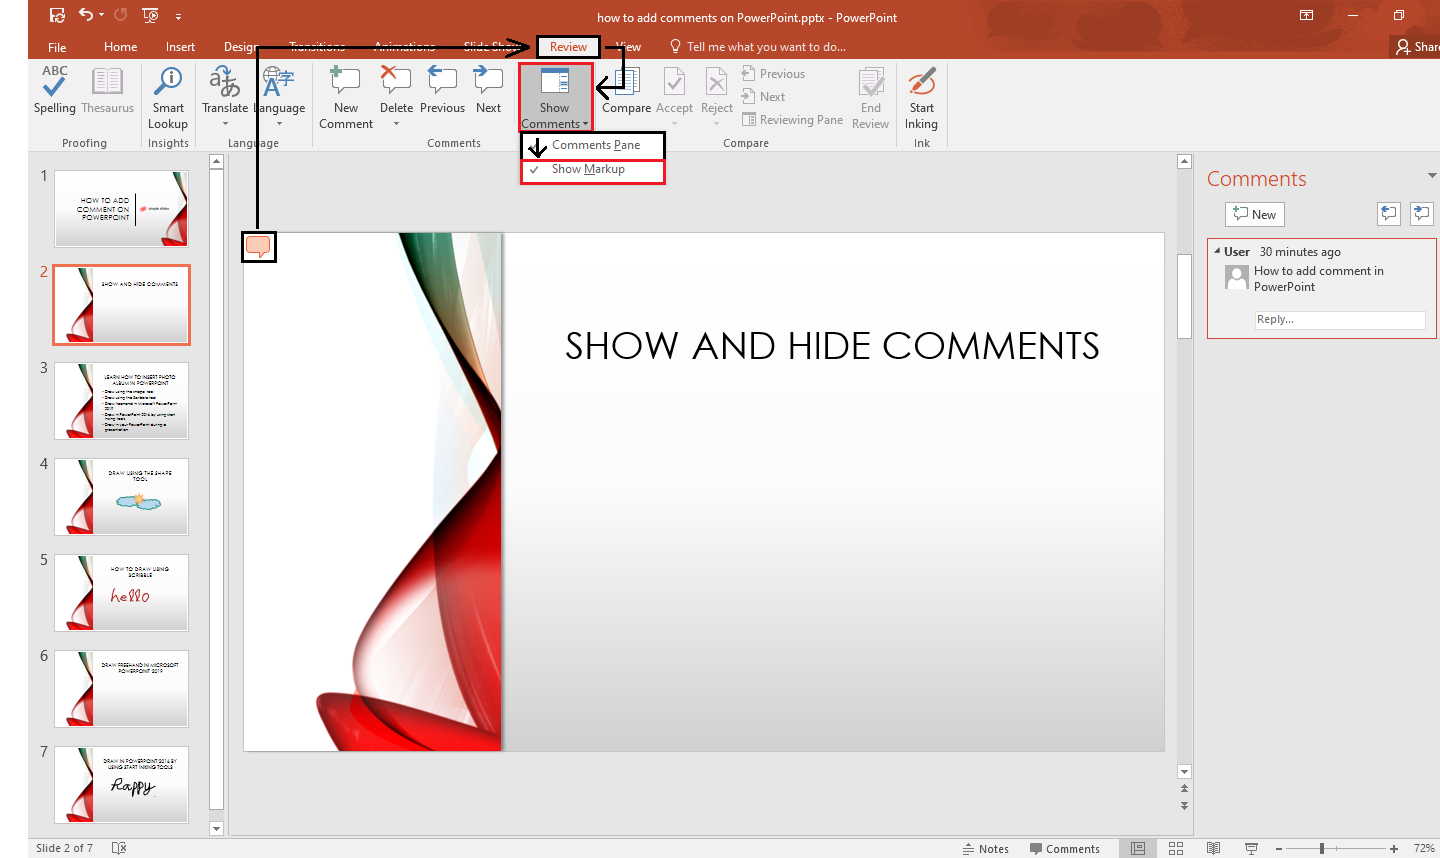 Navigate and select "Show Comments" and click "Show Markup."